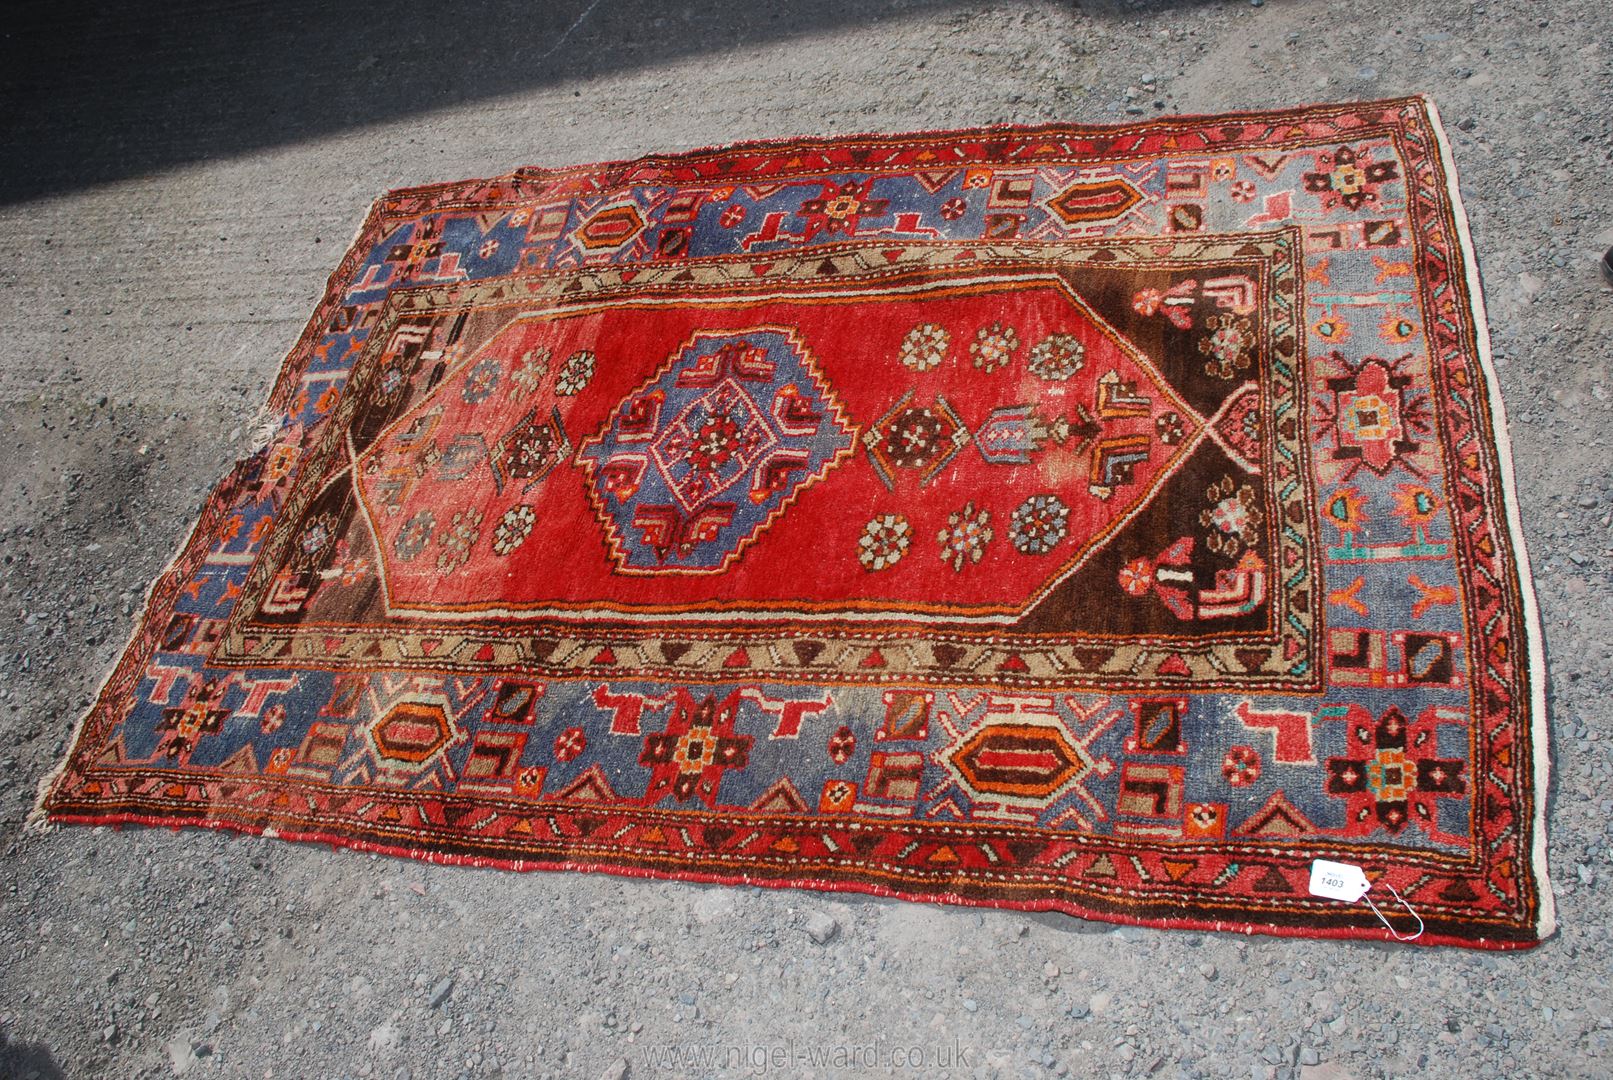 A bordered and patterned Rug, some fading and damage, 79'' x 54''.